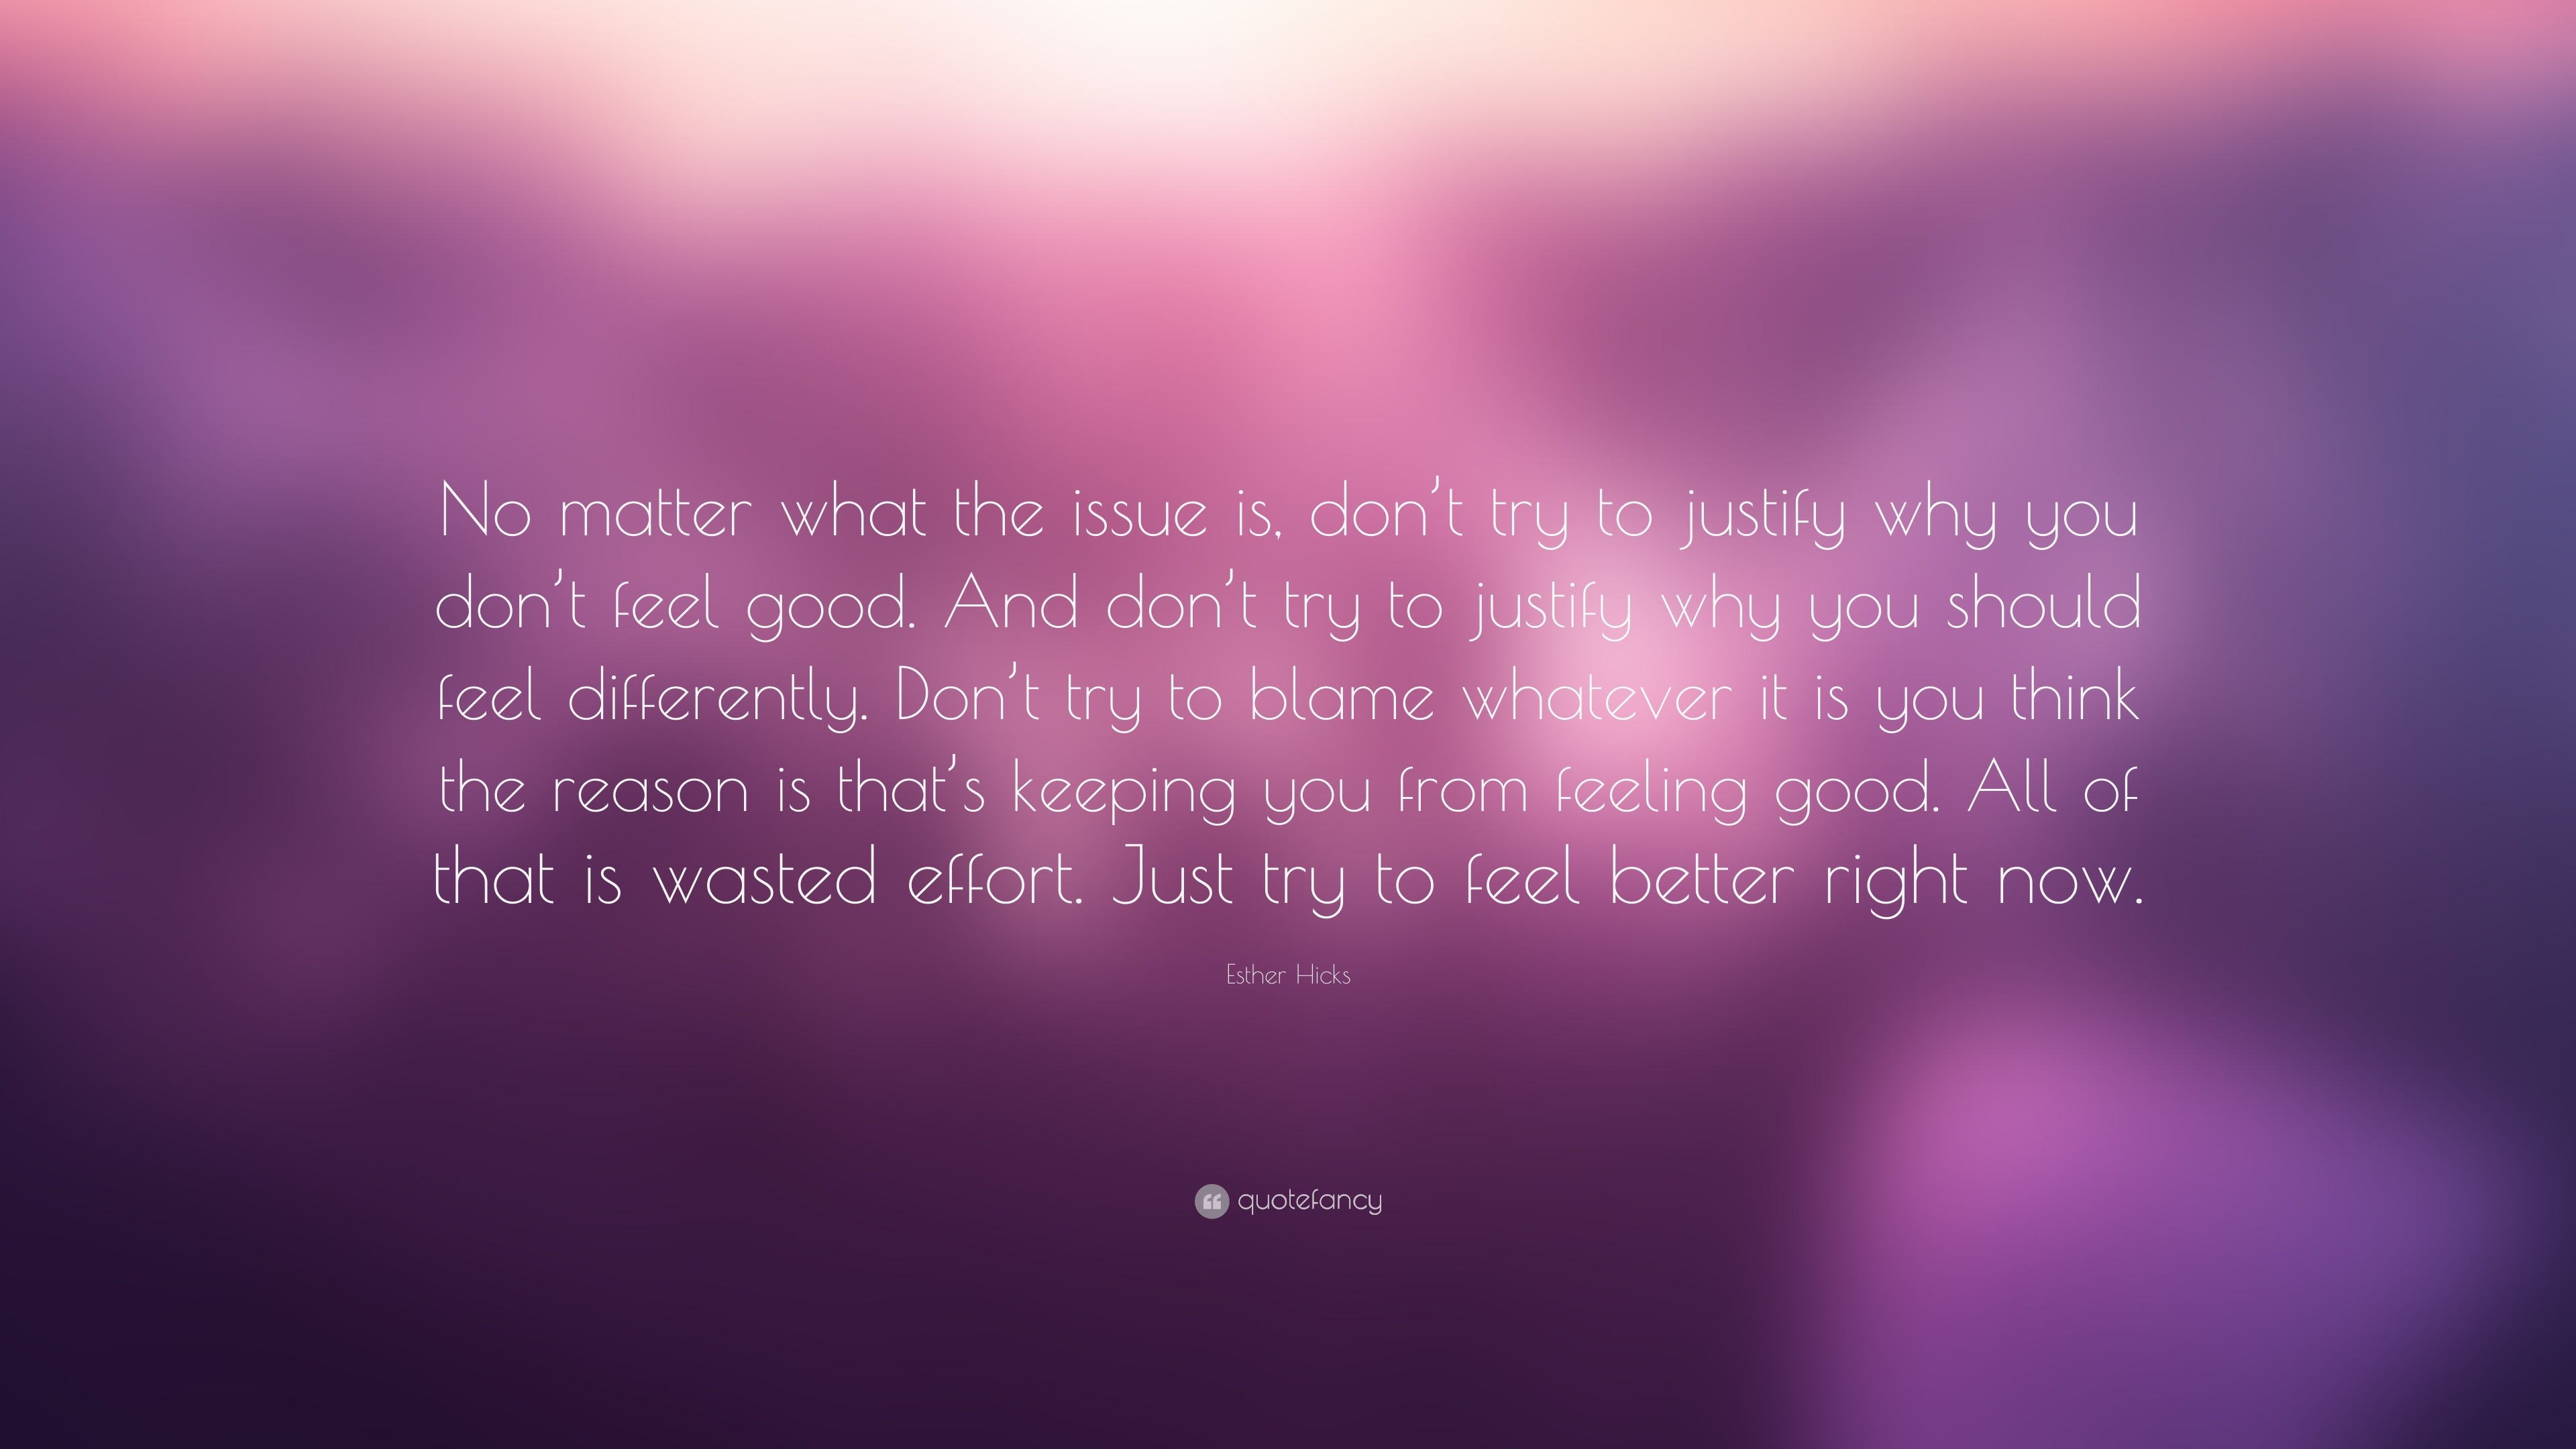 Esther Hicks Quote: “No matter what the issue is, don't try to justify why  you don't feel good. And don't try to justify why you should feel ...”